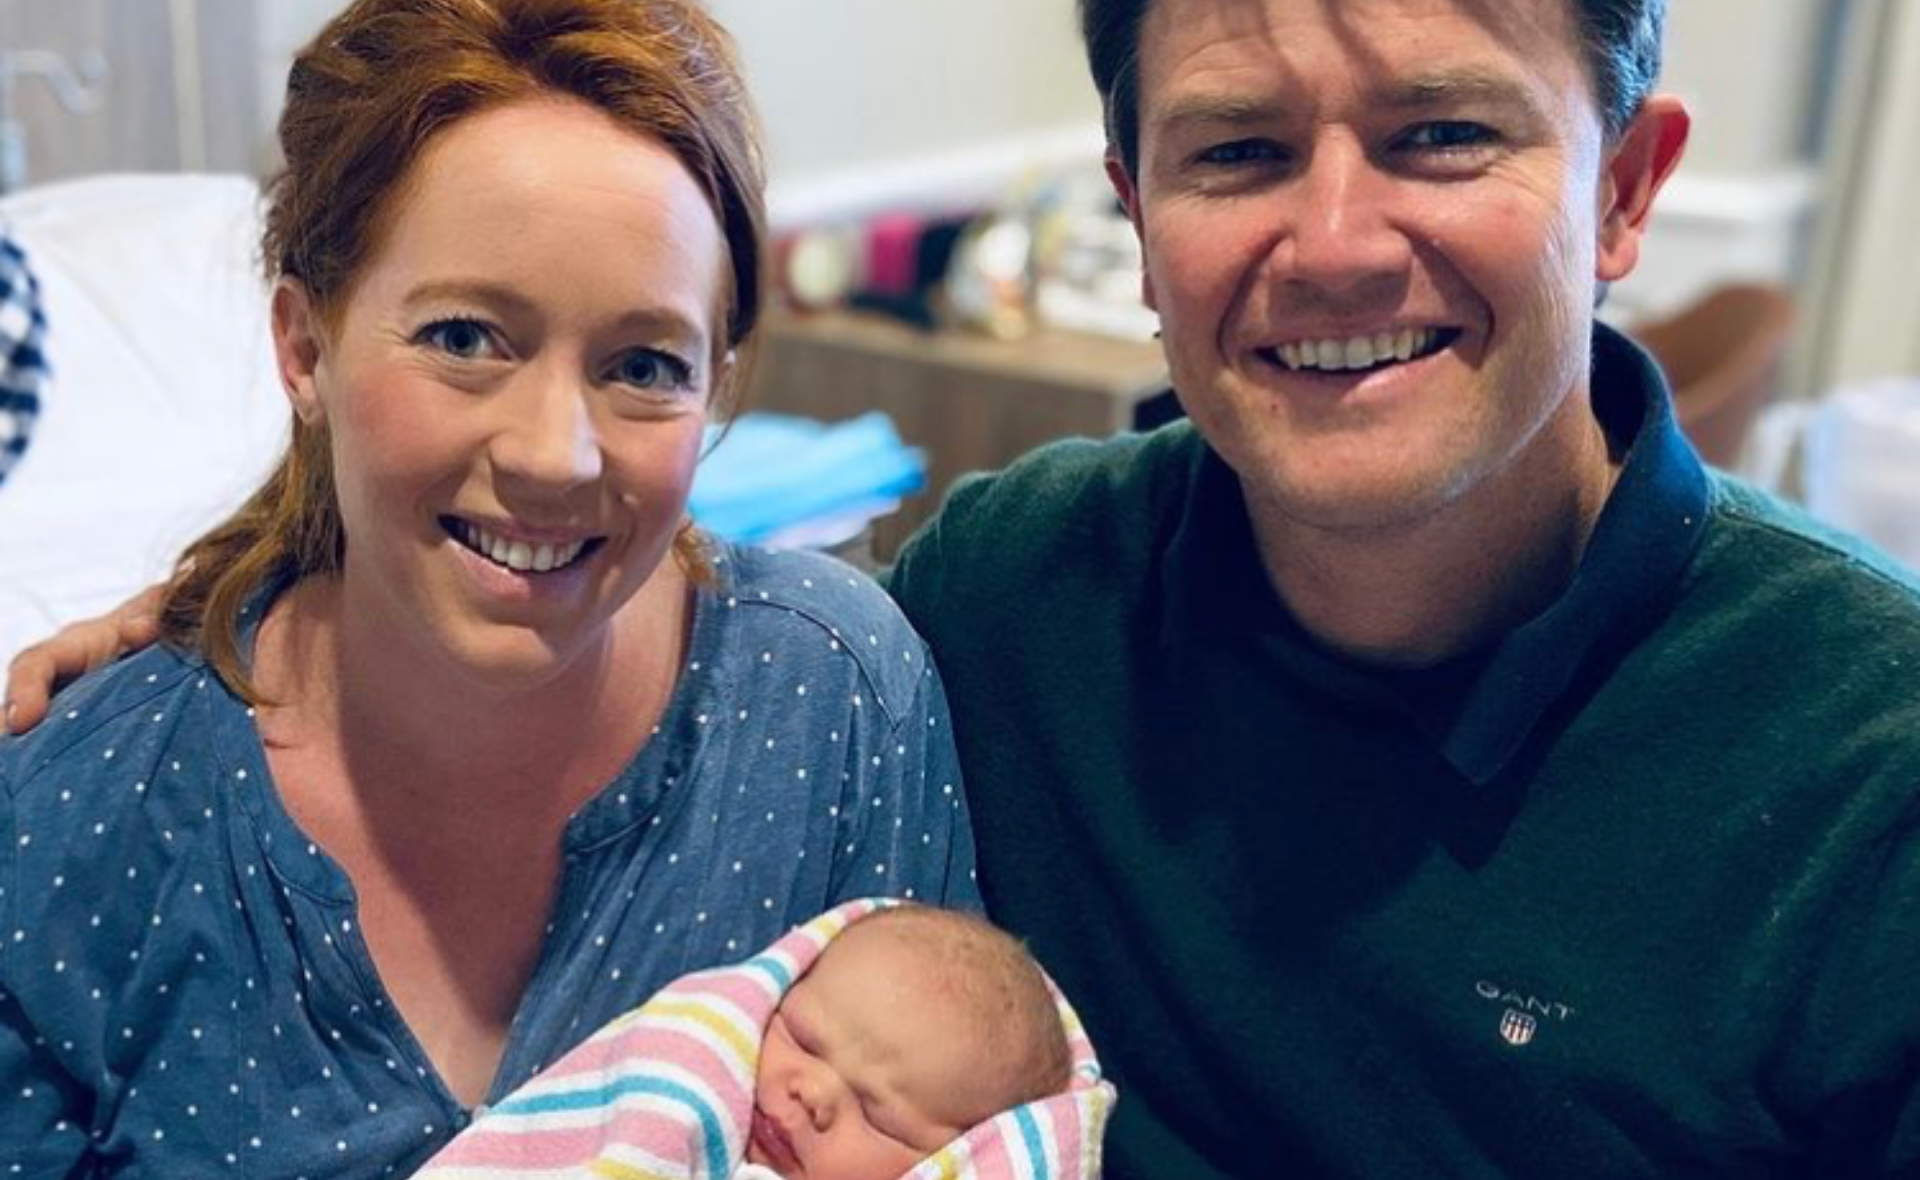 And then there were three! The Today Show’s Alex Cullen just welcomed his third child